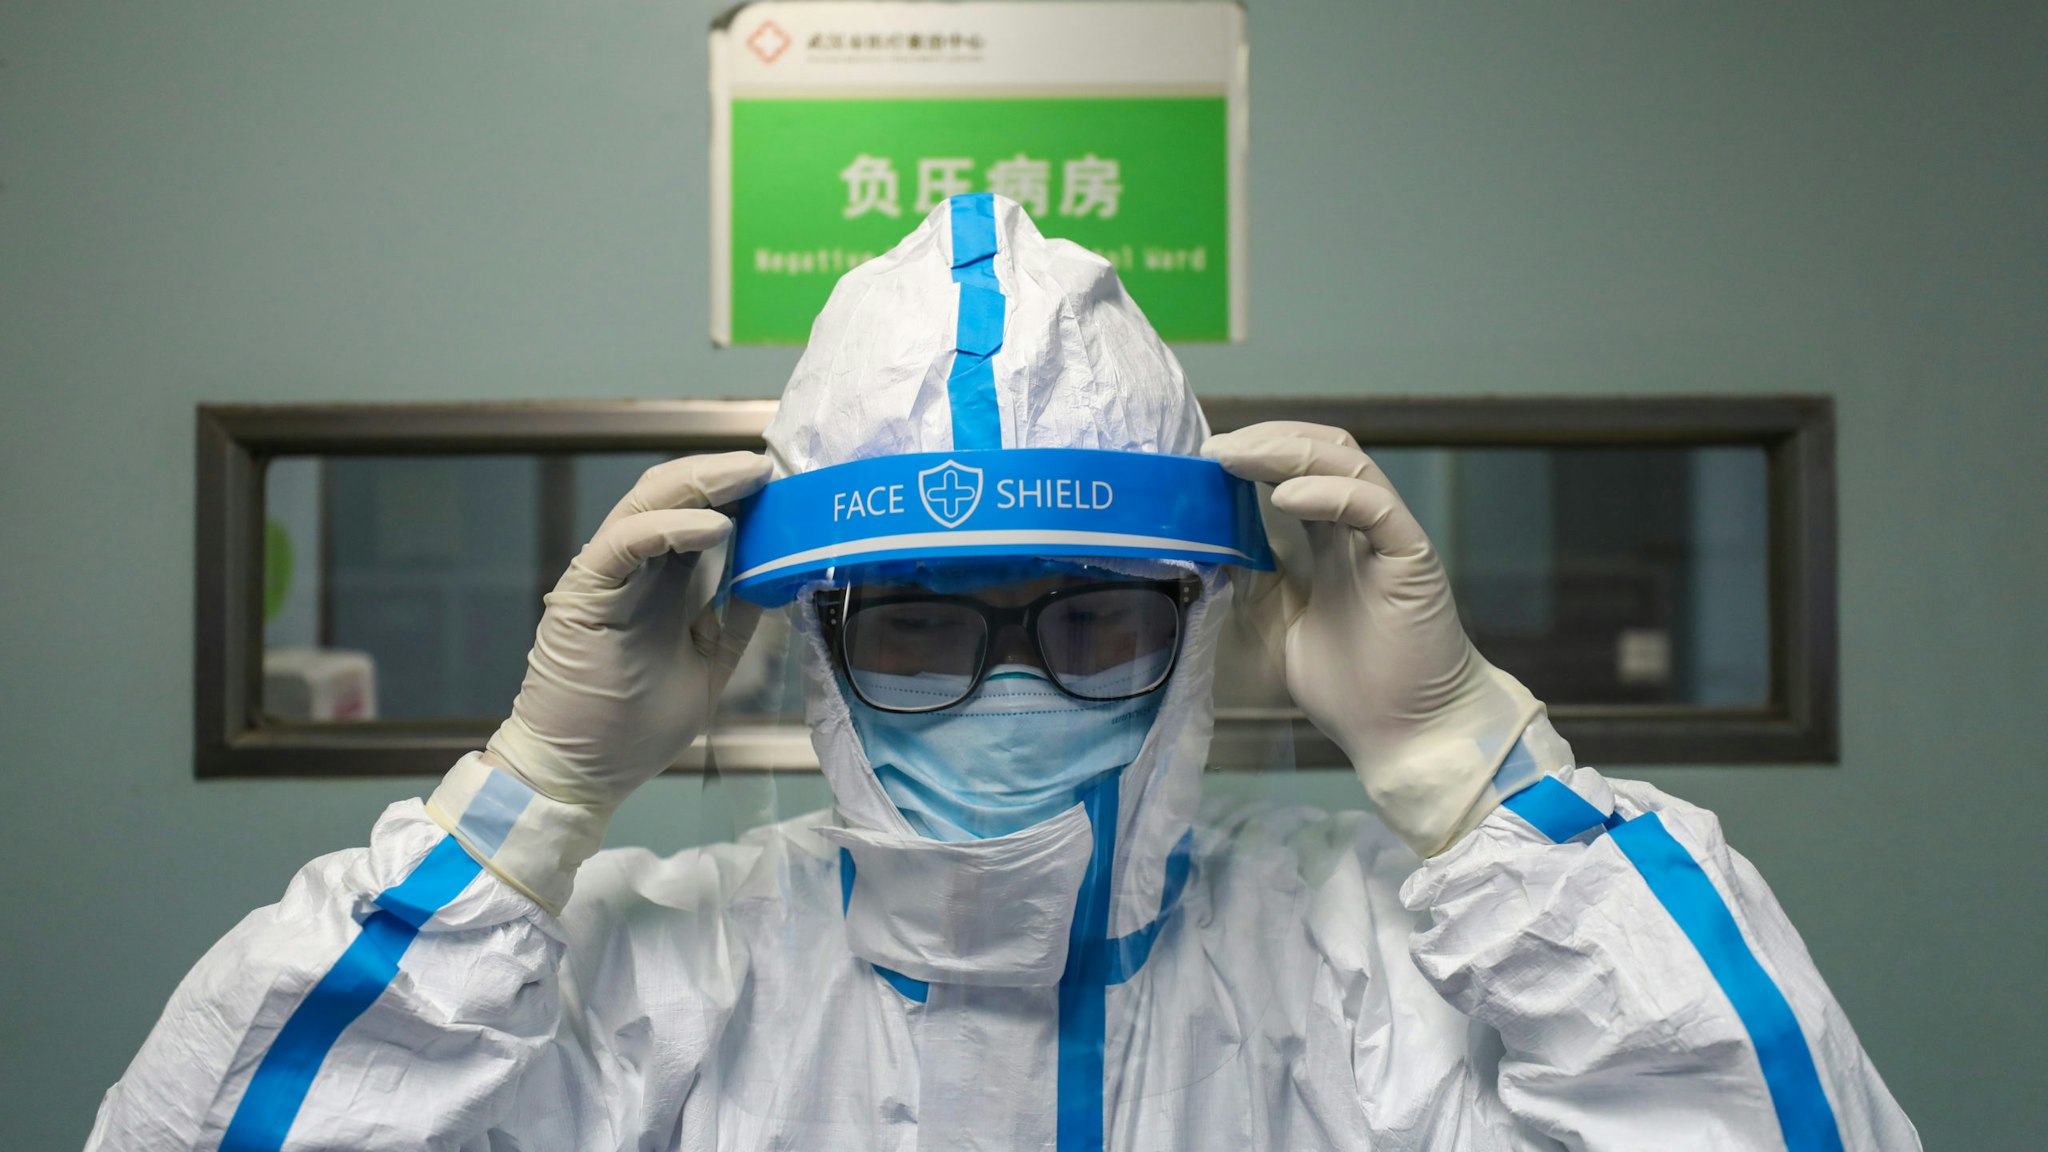 WUHAN, CHINA - FEBRUARY 13 2020: A doctor puts on the isolation outfit before entering the negative-pressure isolation ward in Jinyintan Hospital, designated for critical COVID-19 patients, in Wuhan in central China's Hubei province Thursday, Feb. 13, 2020. The city reported 13,436 new cases of COVID-19 Feb. 12, a big jump after the city combed communities for patients and expanded the capacity to take them in.